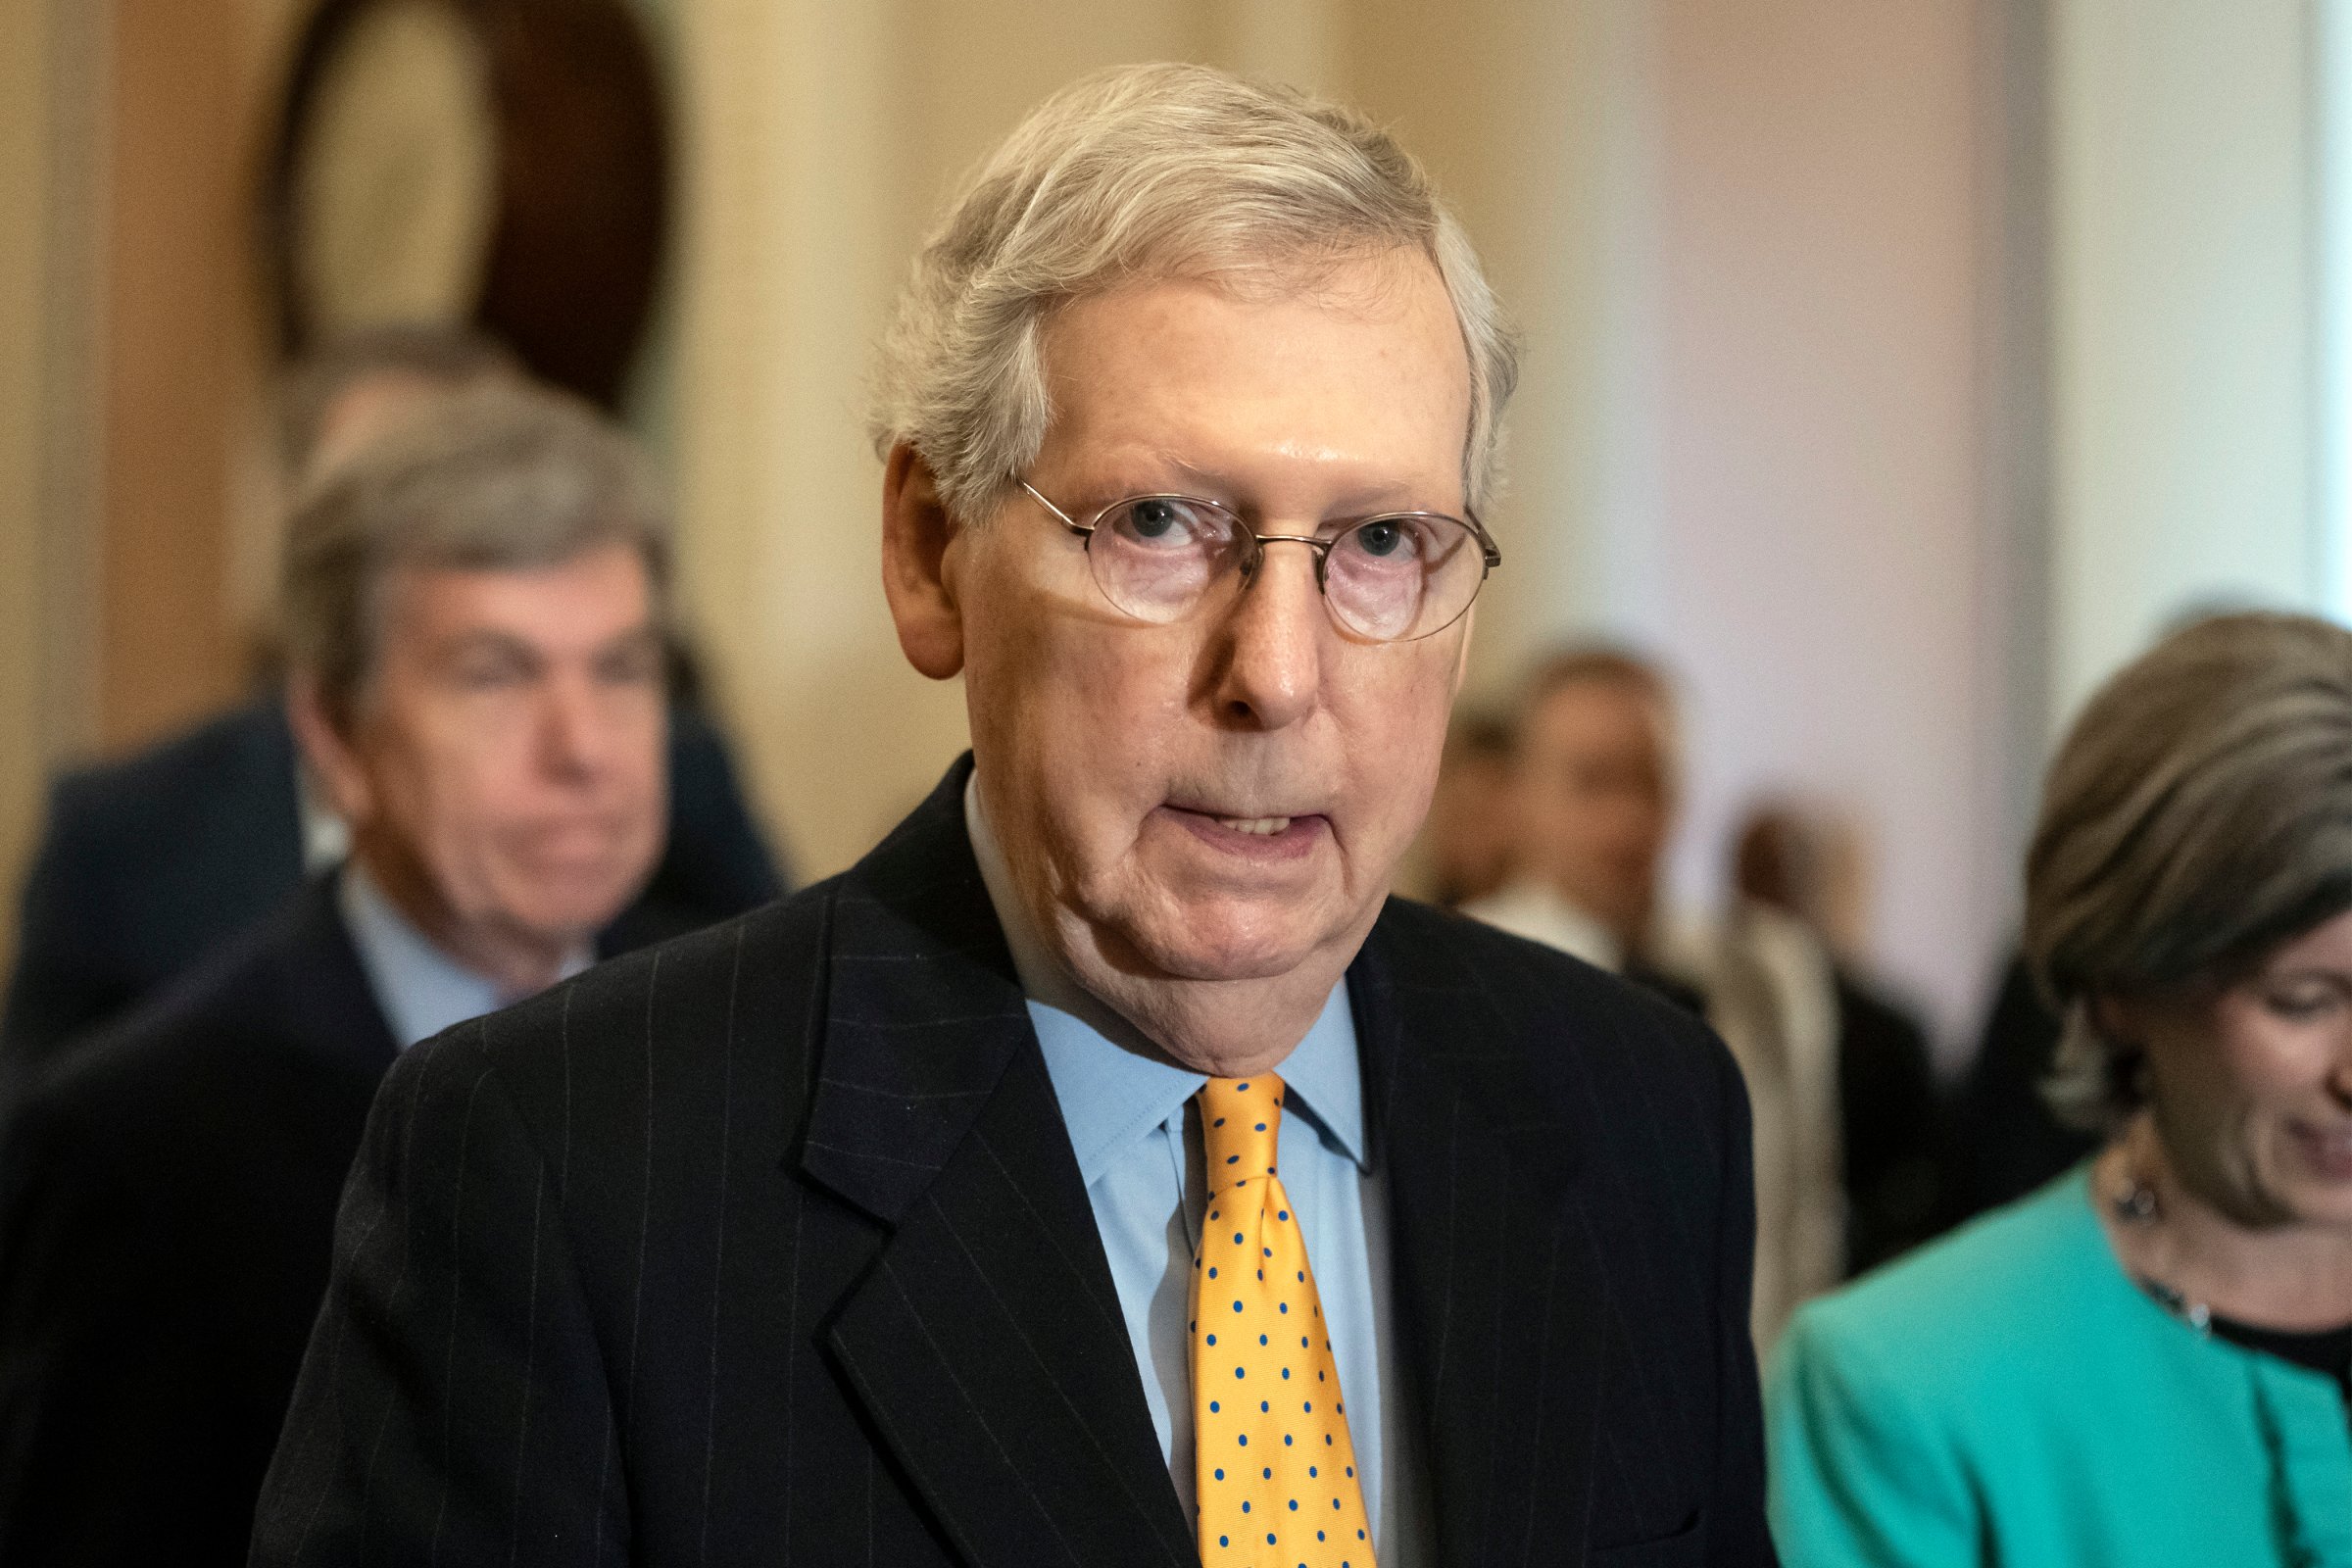 Senate Majority Leader Mitch McConnell wants to raise the minimum age for tobacco products, including vaping devices, to 21 from 18.